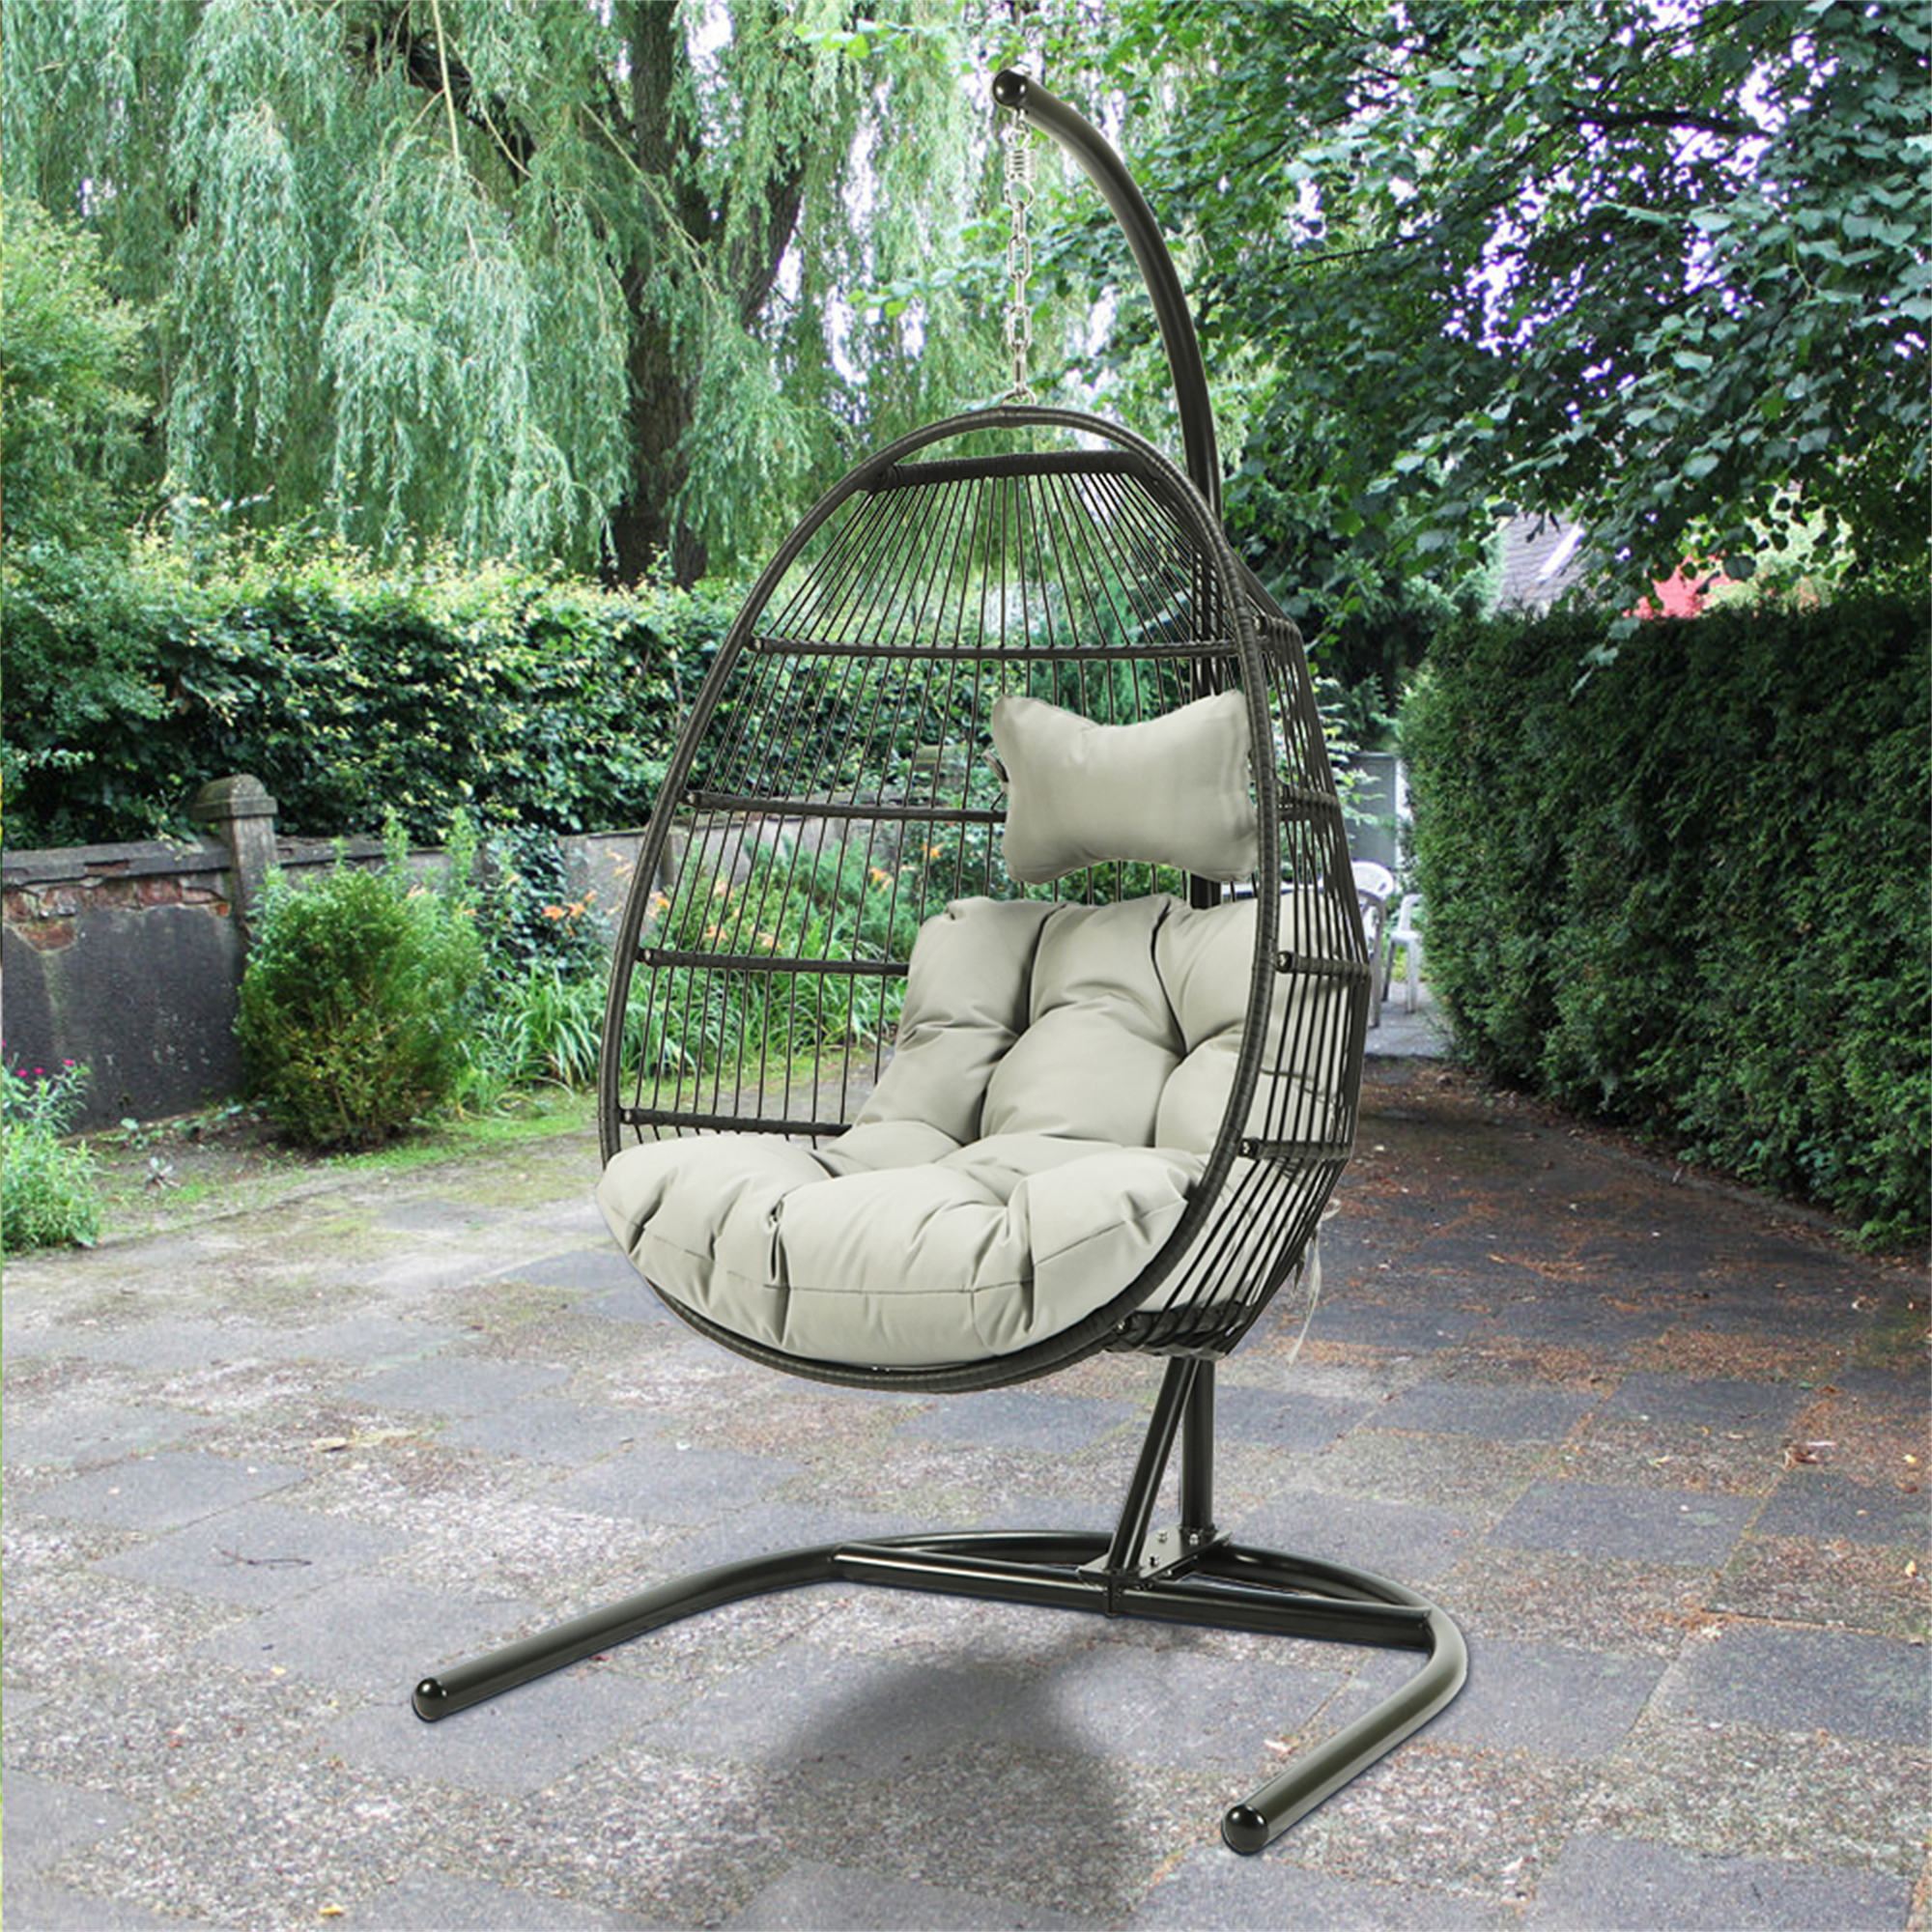 Swing Egg Chair, Hammock Chair, Rattan Wicker Hanging Outdoor Chair with Stand, Indoor Outdoor Chair Swing, for Kids Teens Adults, Comfortable Hammock Chair for Patio Yard Living Room Bedroom, Beige - image 1 of 7